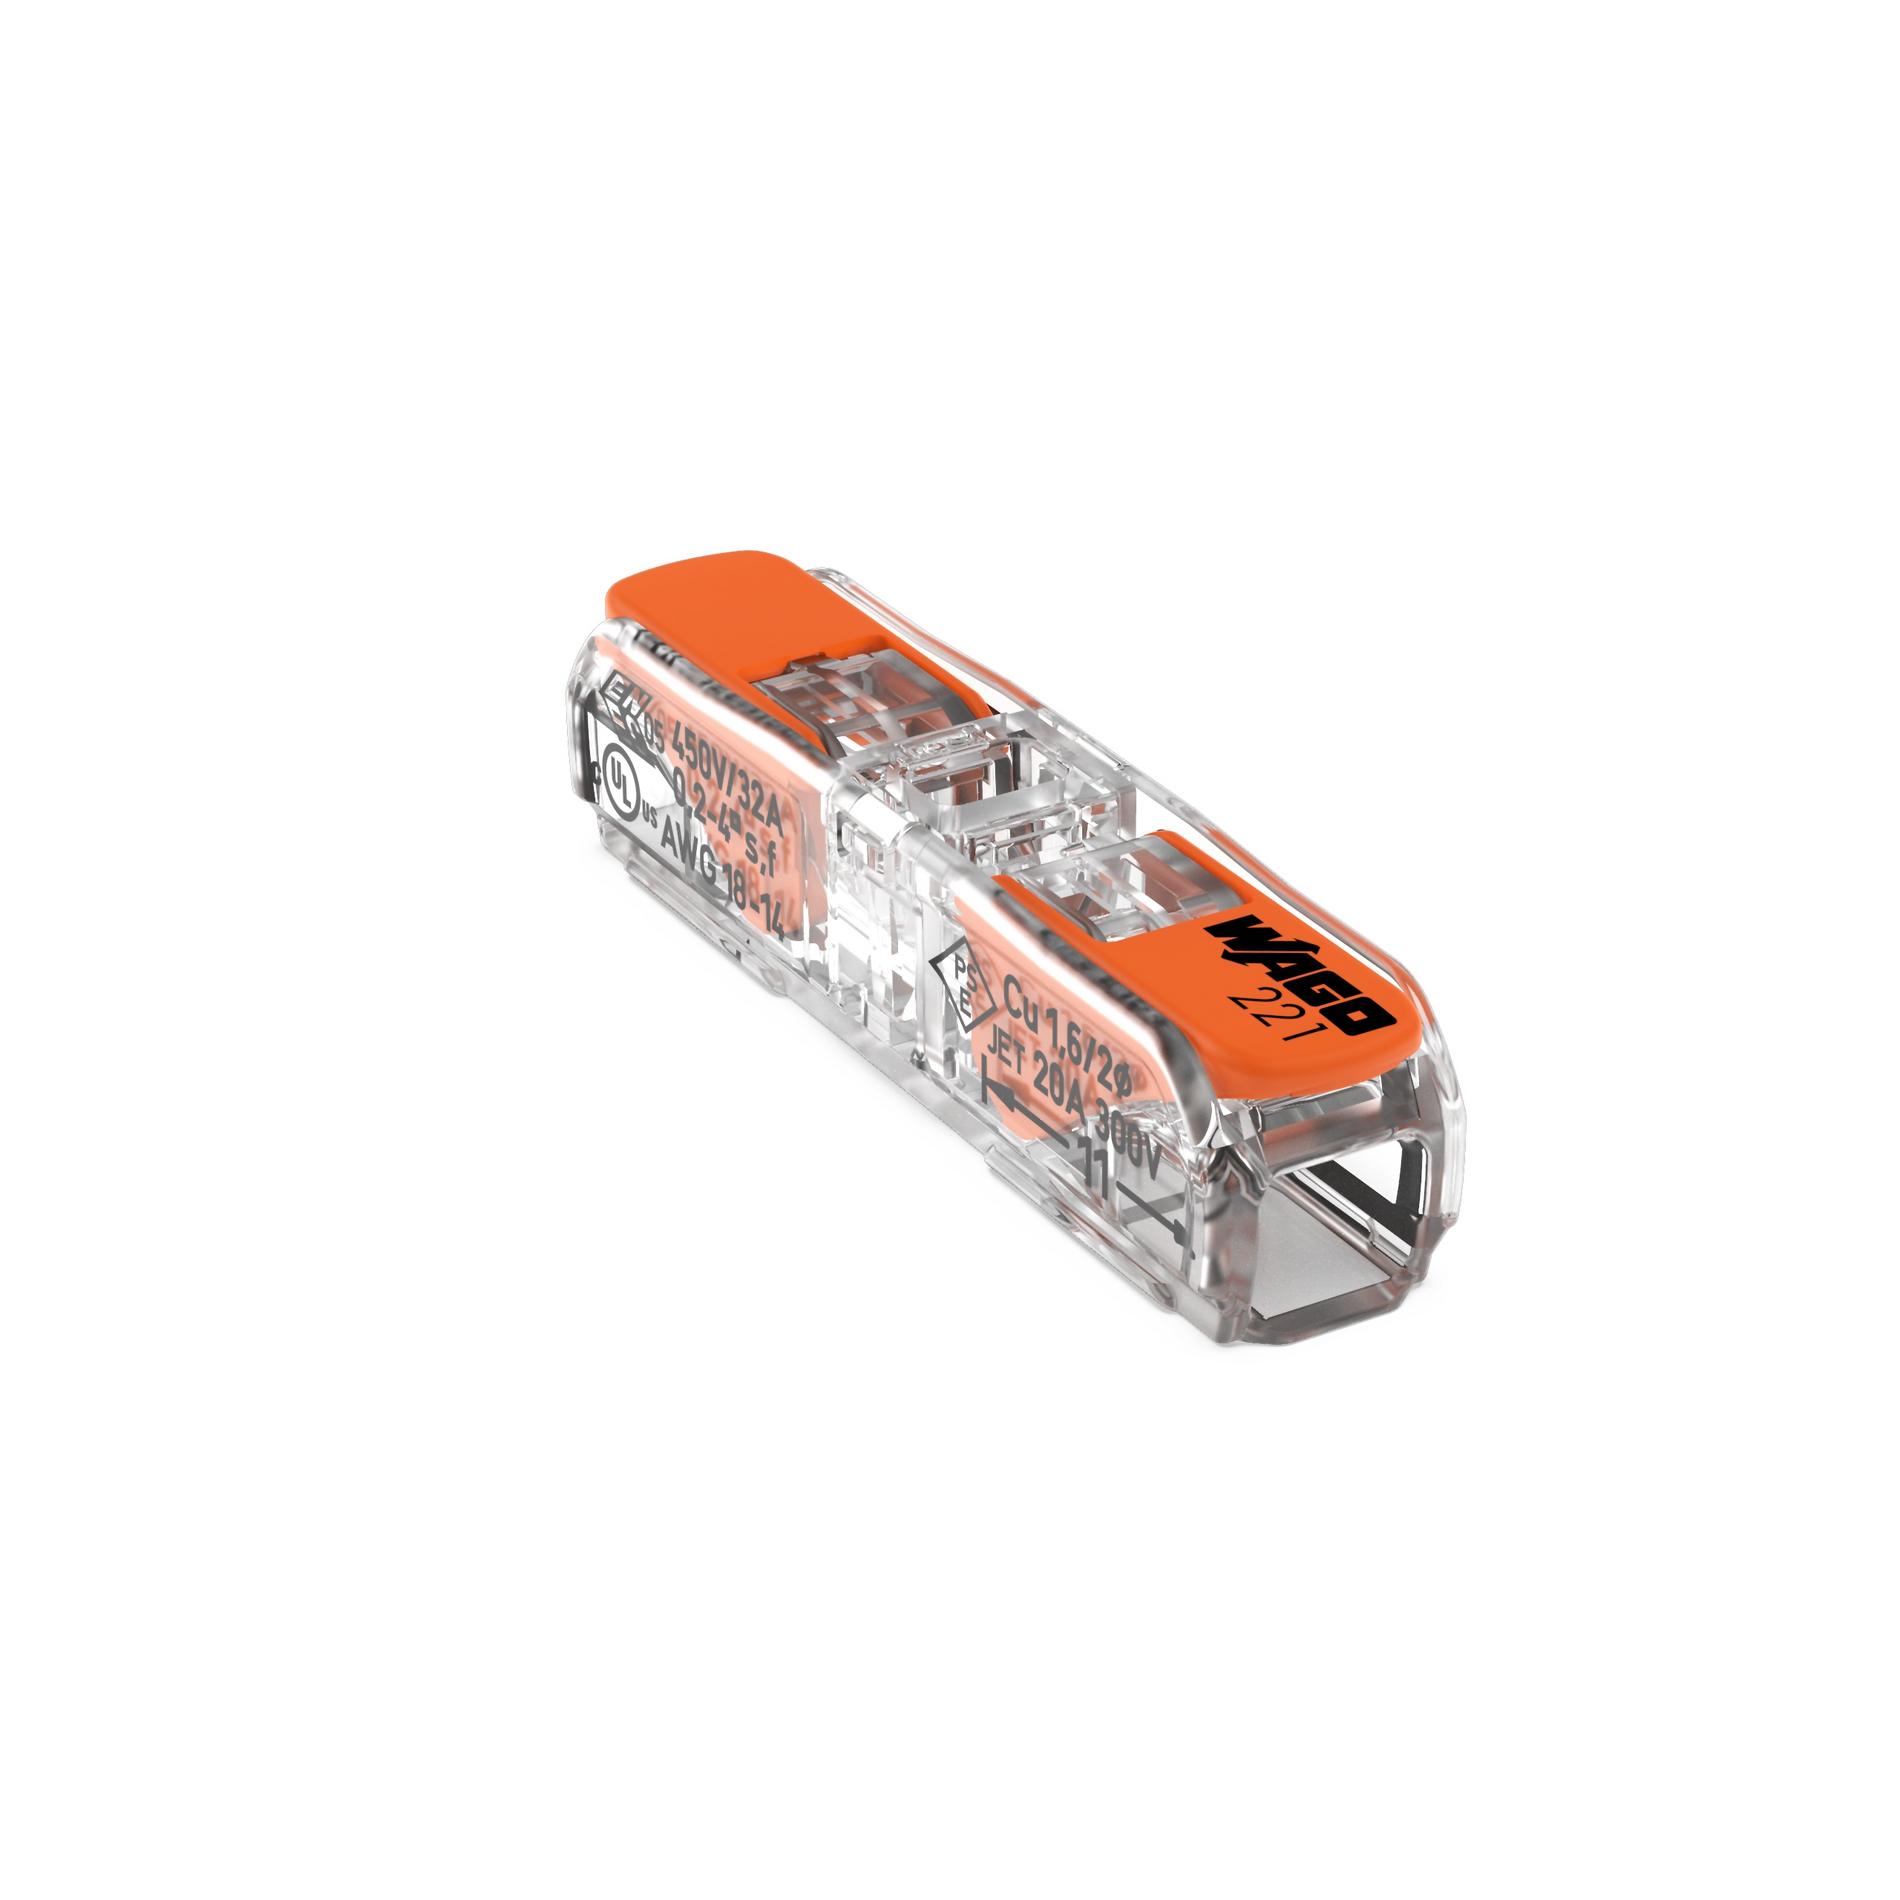 Buy WAGO 221-2411 Connector clip flexible: 0.14-4 mm² fixed: 0.2-4 mm²  Number of pins (num): 1 60 pc(s) Transparent, Orange